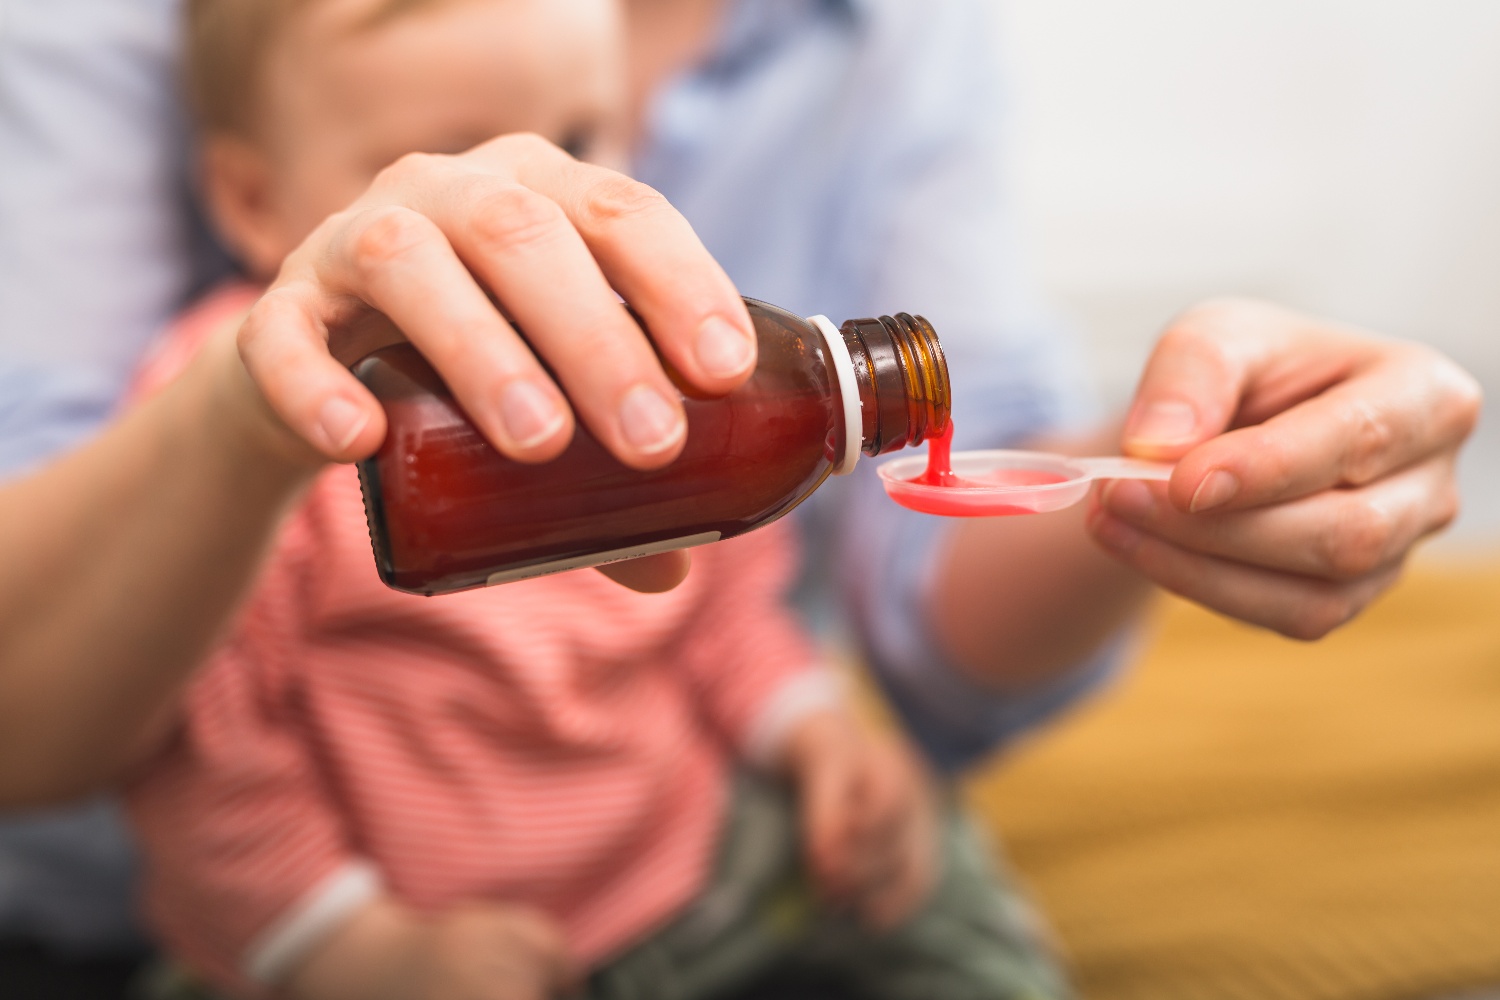 Understanding the Importance and Uses of Antibiotics for Children